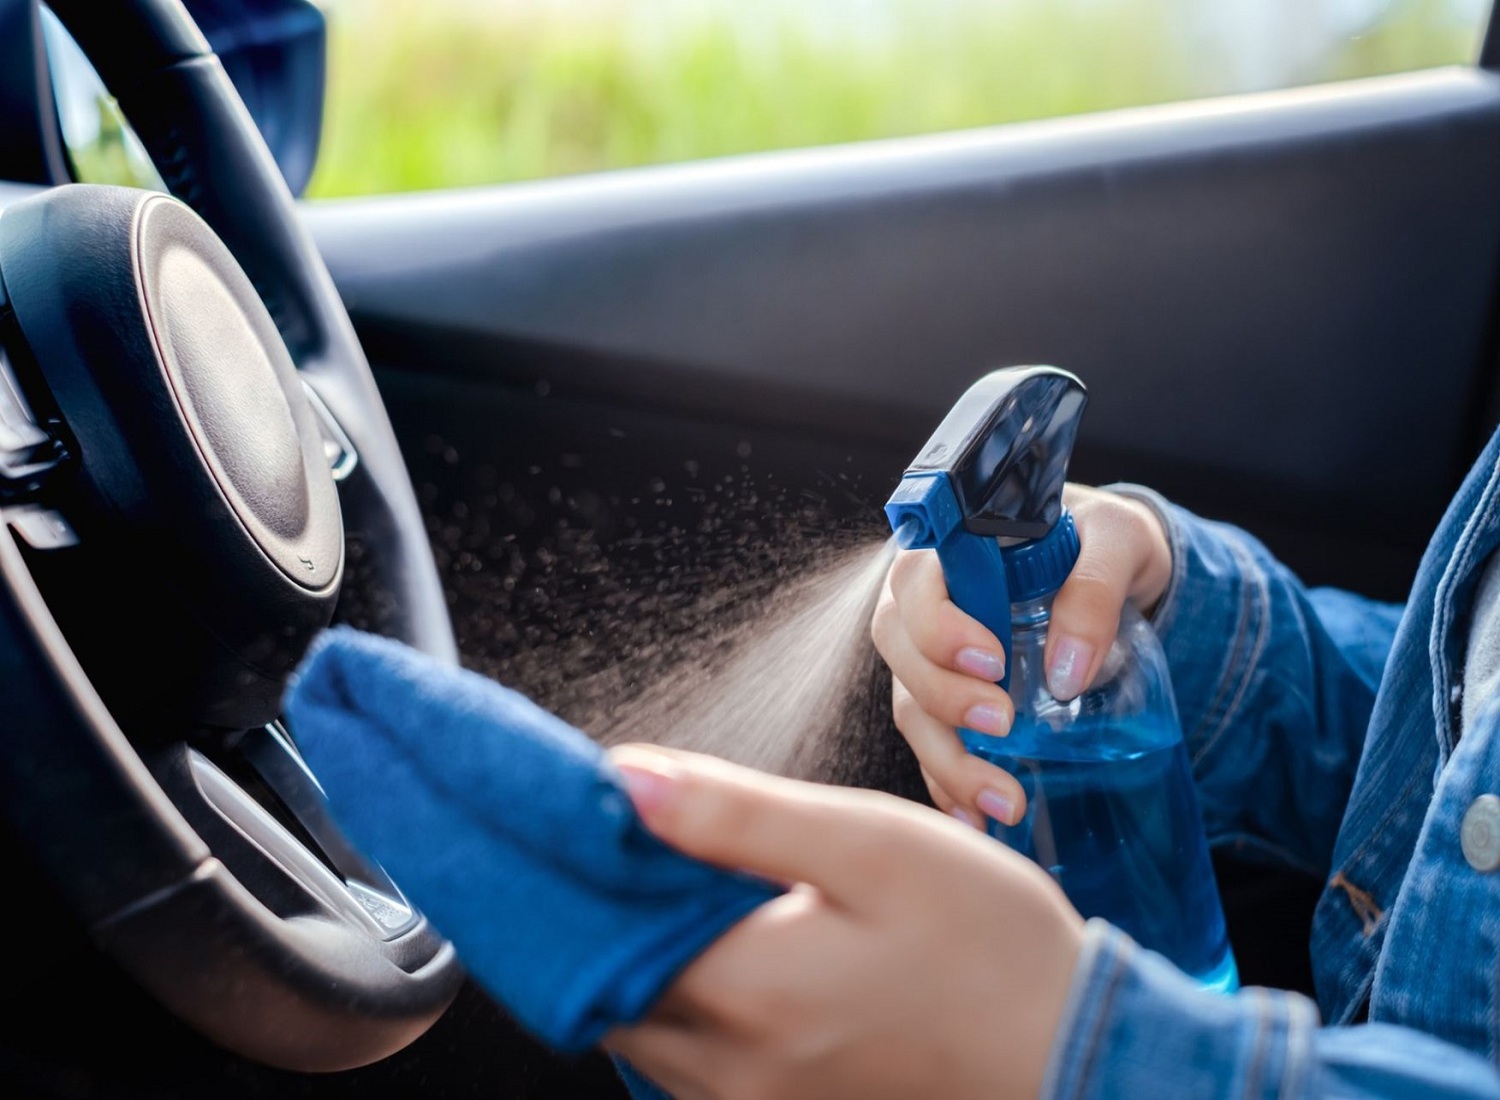 Top-20-Secrets-That-Professional-Car-Cleaners-Use